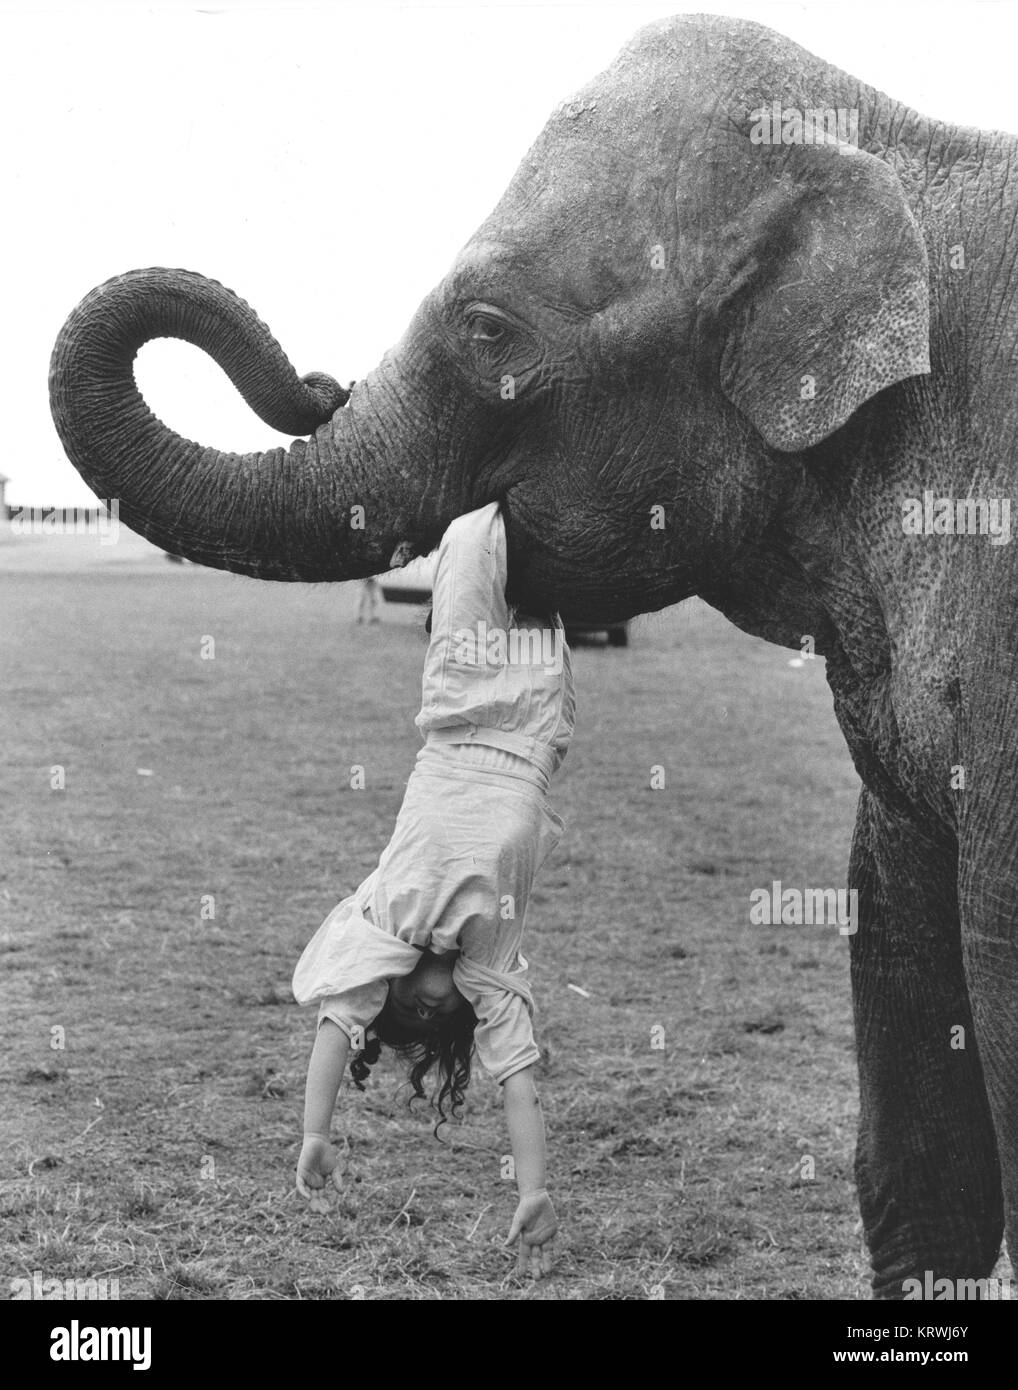 Elephant with child in mouth, England, Great Britain Stock Photo